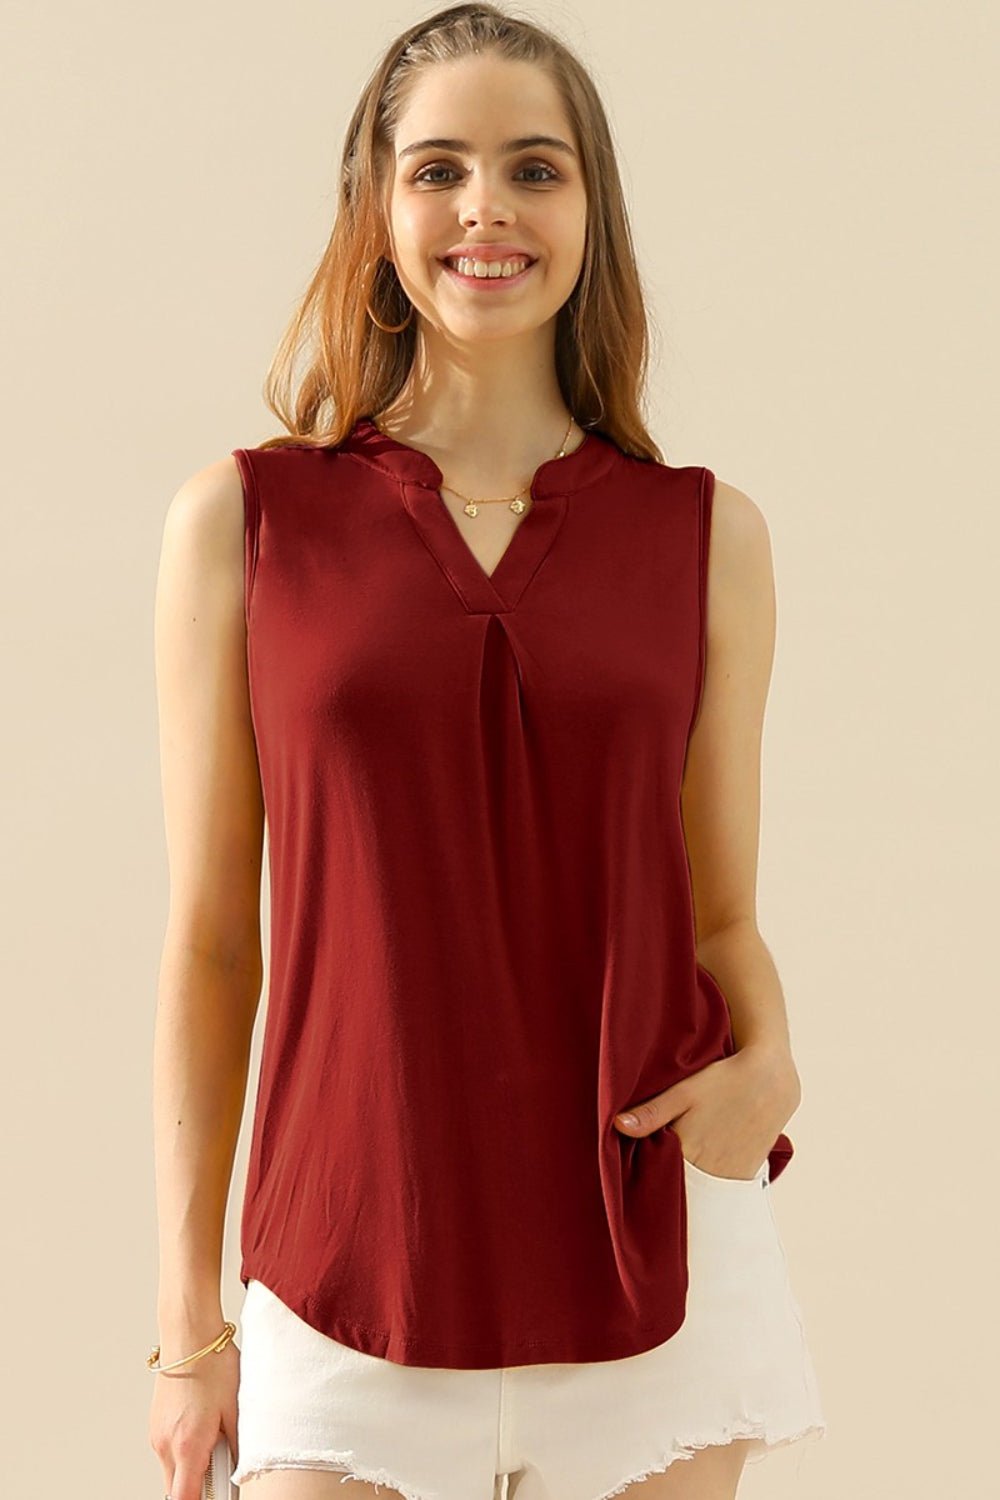 Ninexis Notched Sleeveless Top (S-3X) Available in 10 Colors!